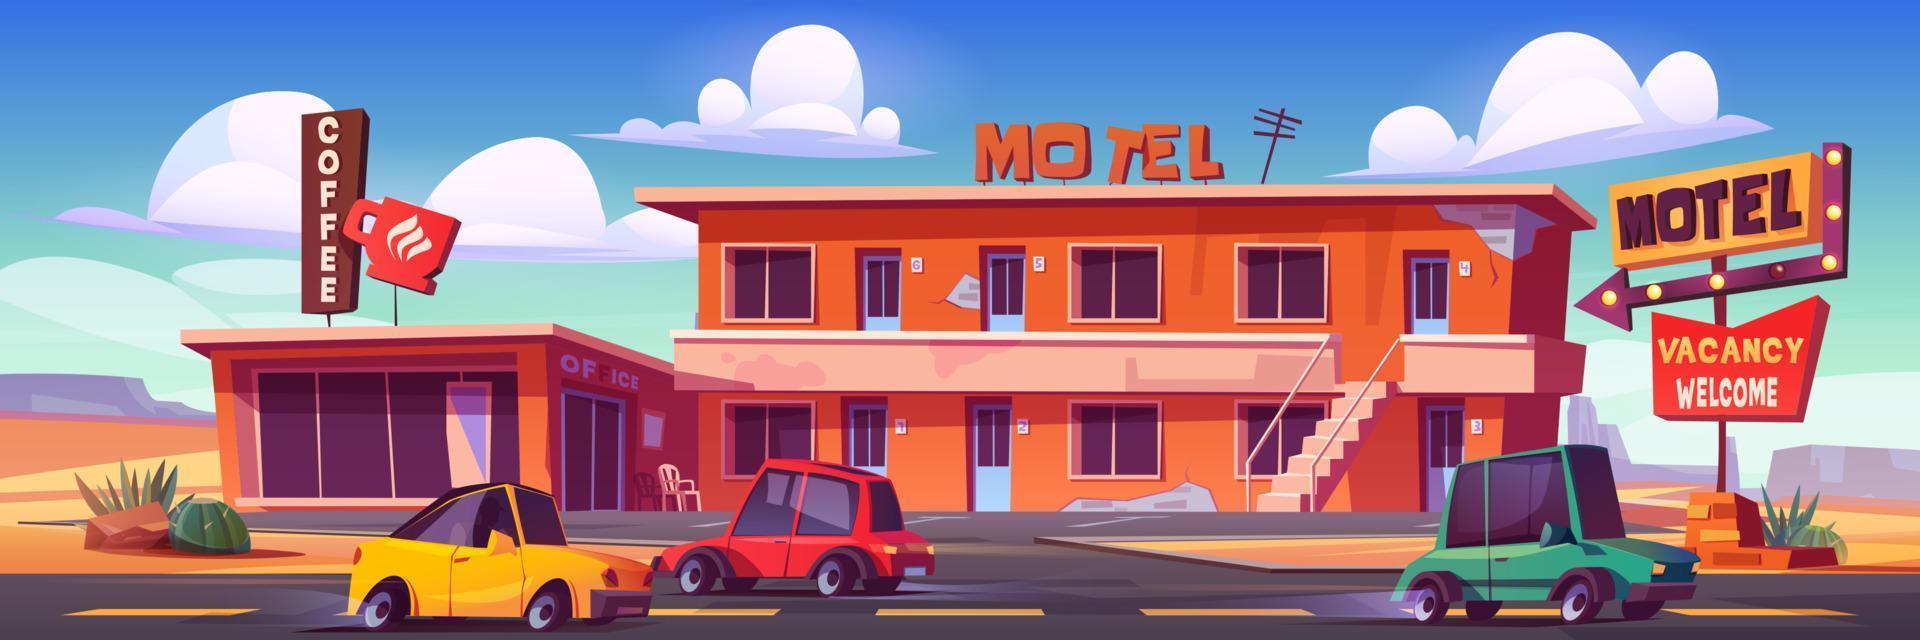 Old motel with cafe and parking in desert vector